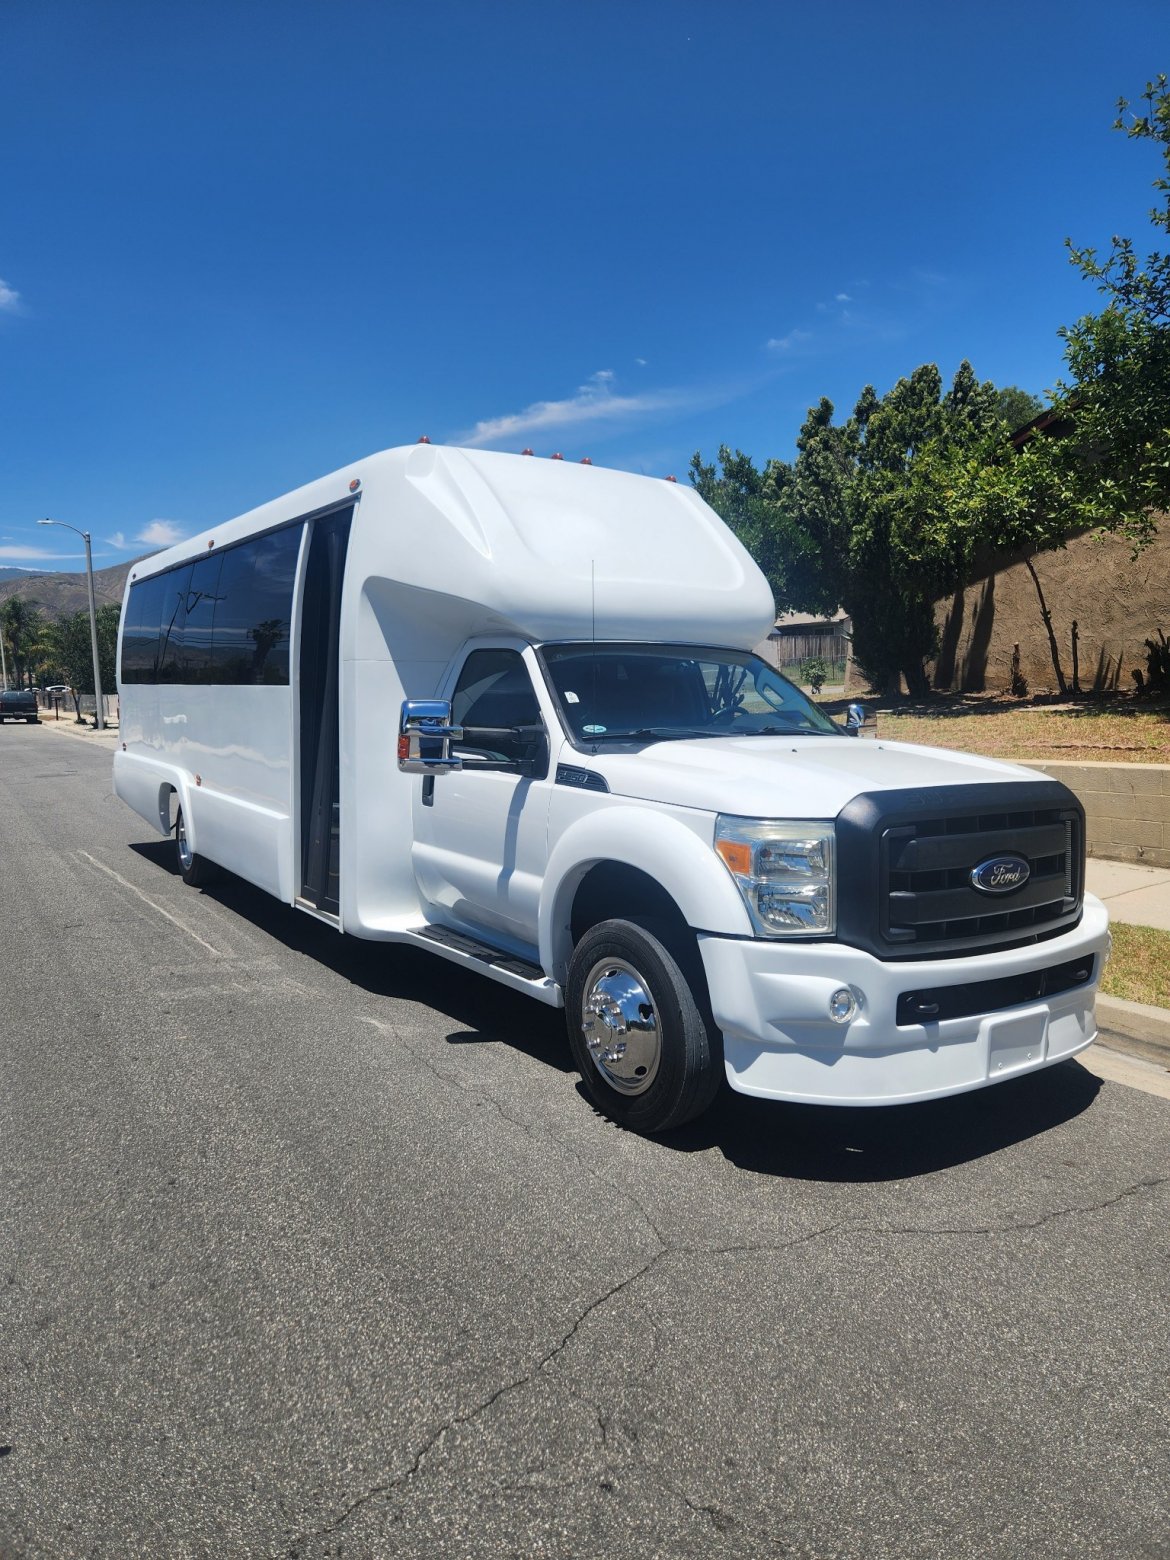 Executive Shuttle for sale: 2015 Ford F550 by Newport Coach